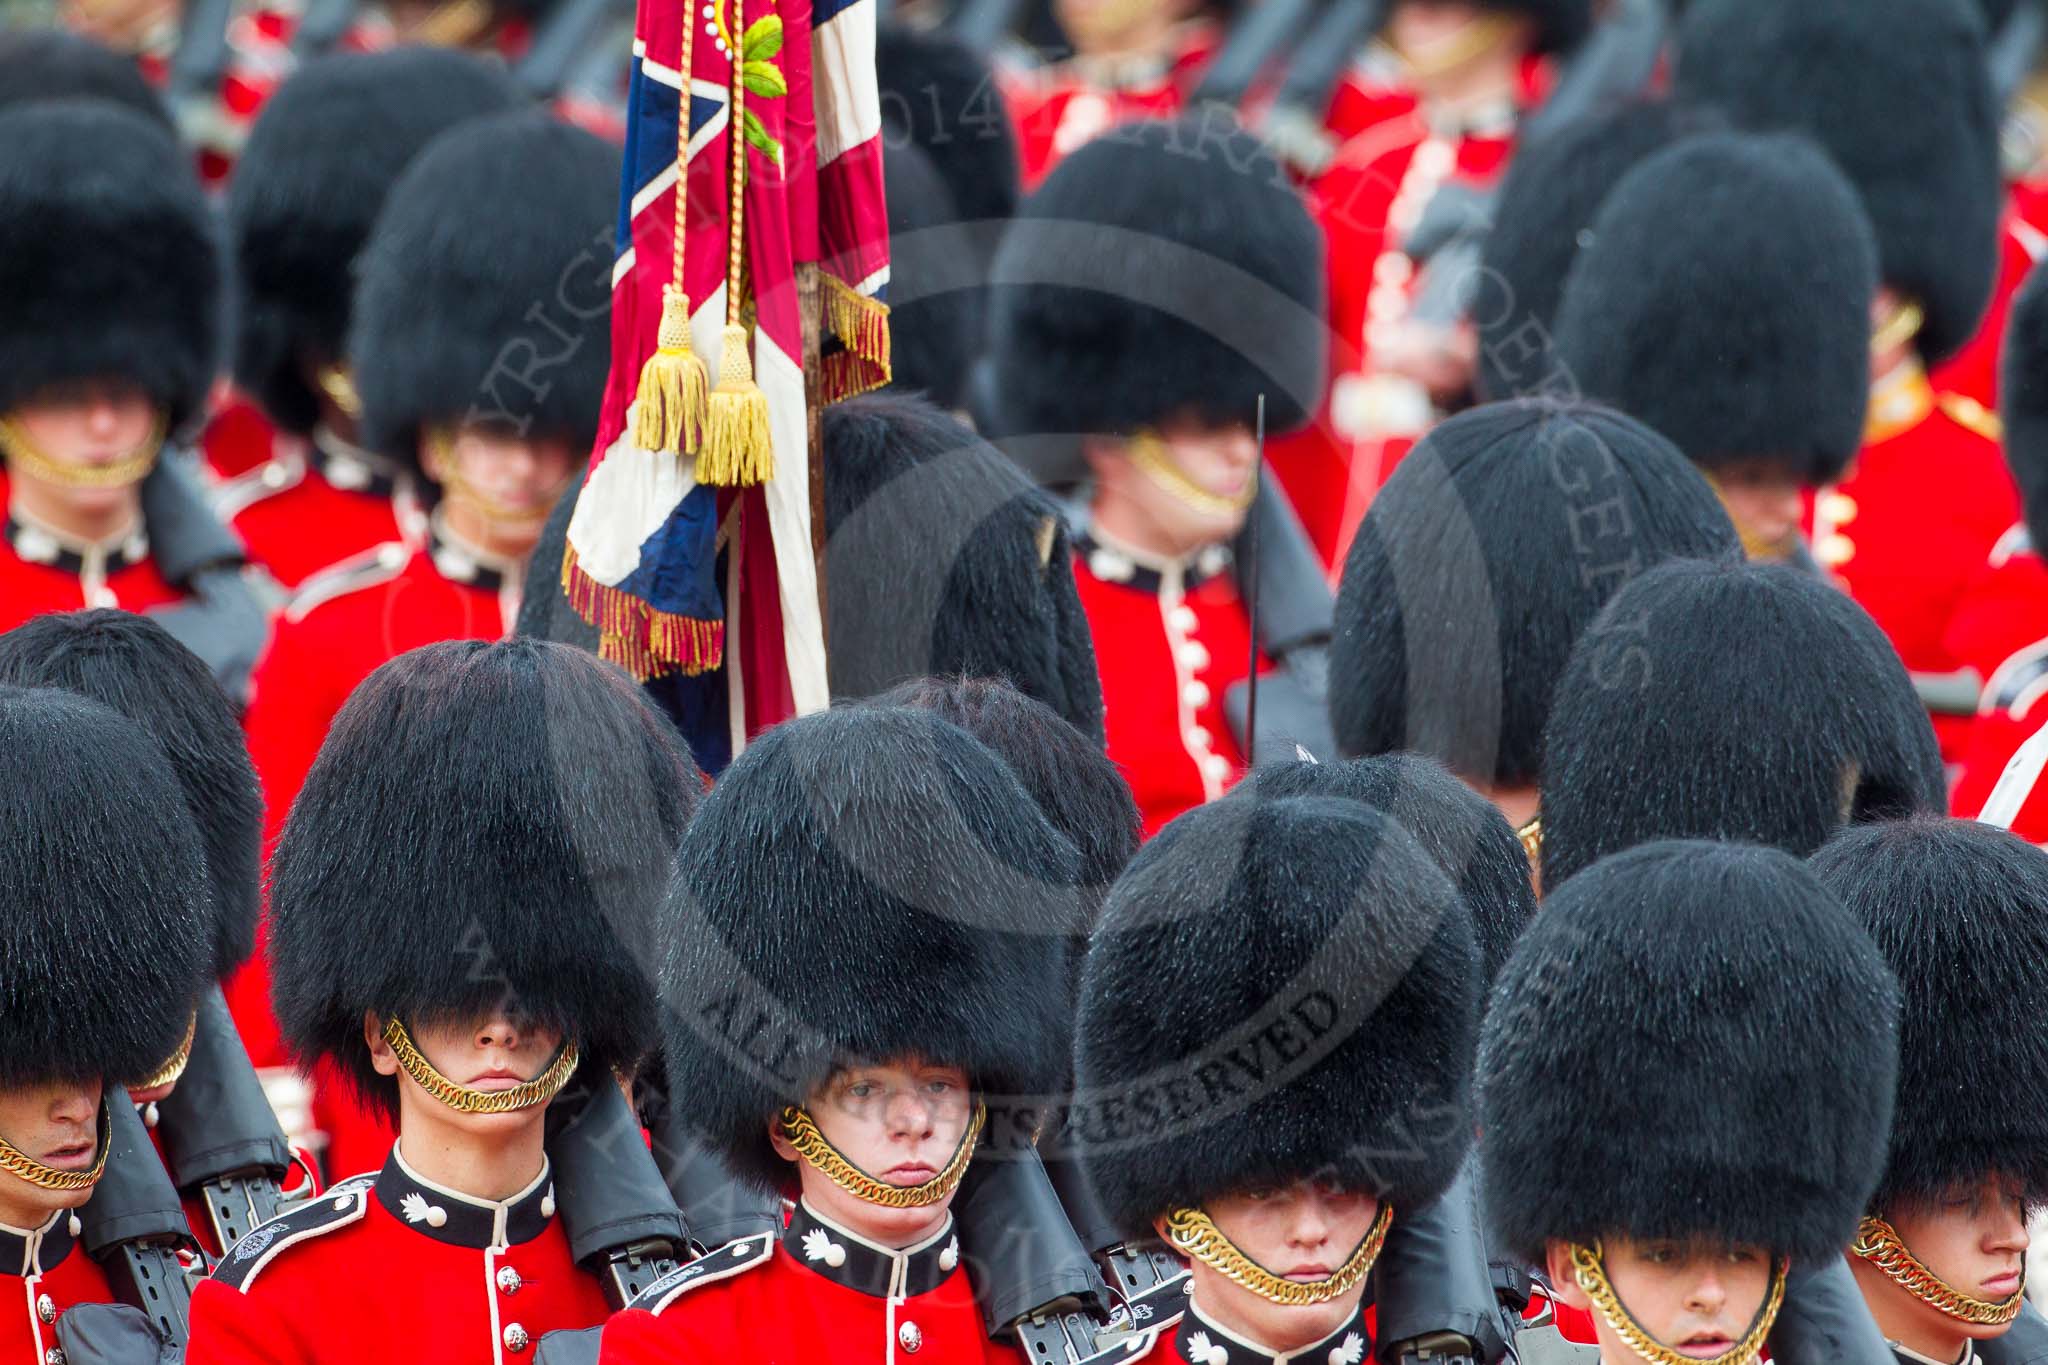 The Colonel's Review 2014.
Horse Guards Parade, Westminster,
London,

United Kingdom,
on 07 June 2014 at 11:43, image #549